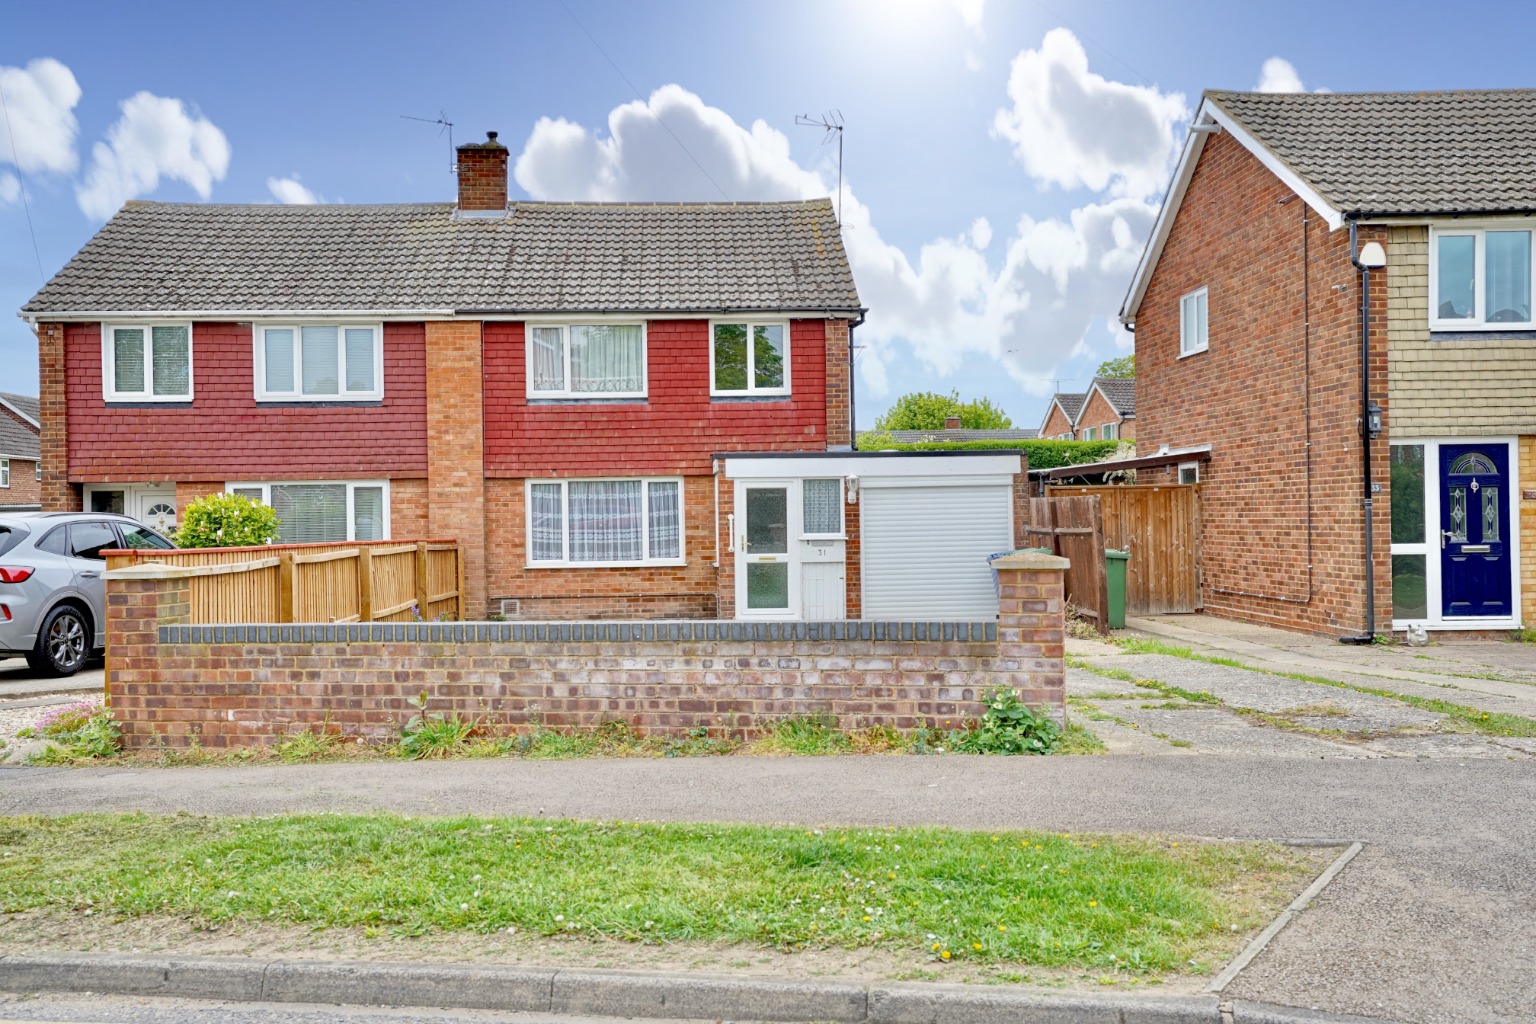 3 bed  for sale in Longsands Road, St. Neots, PE19